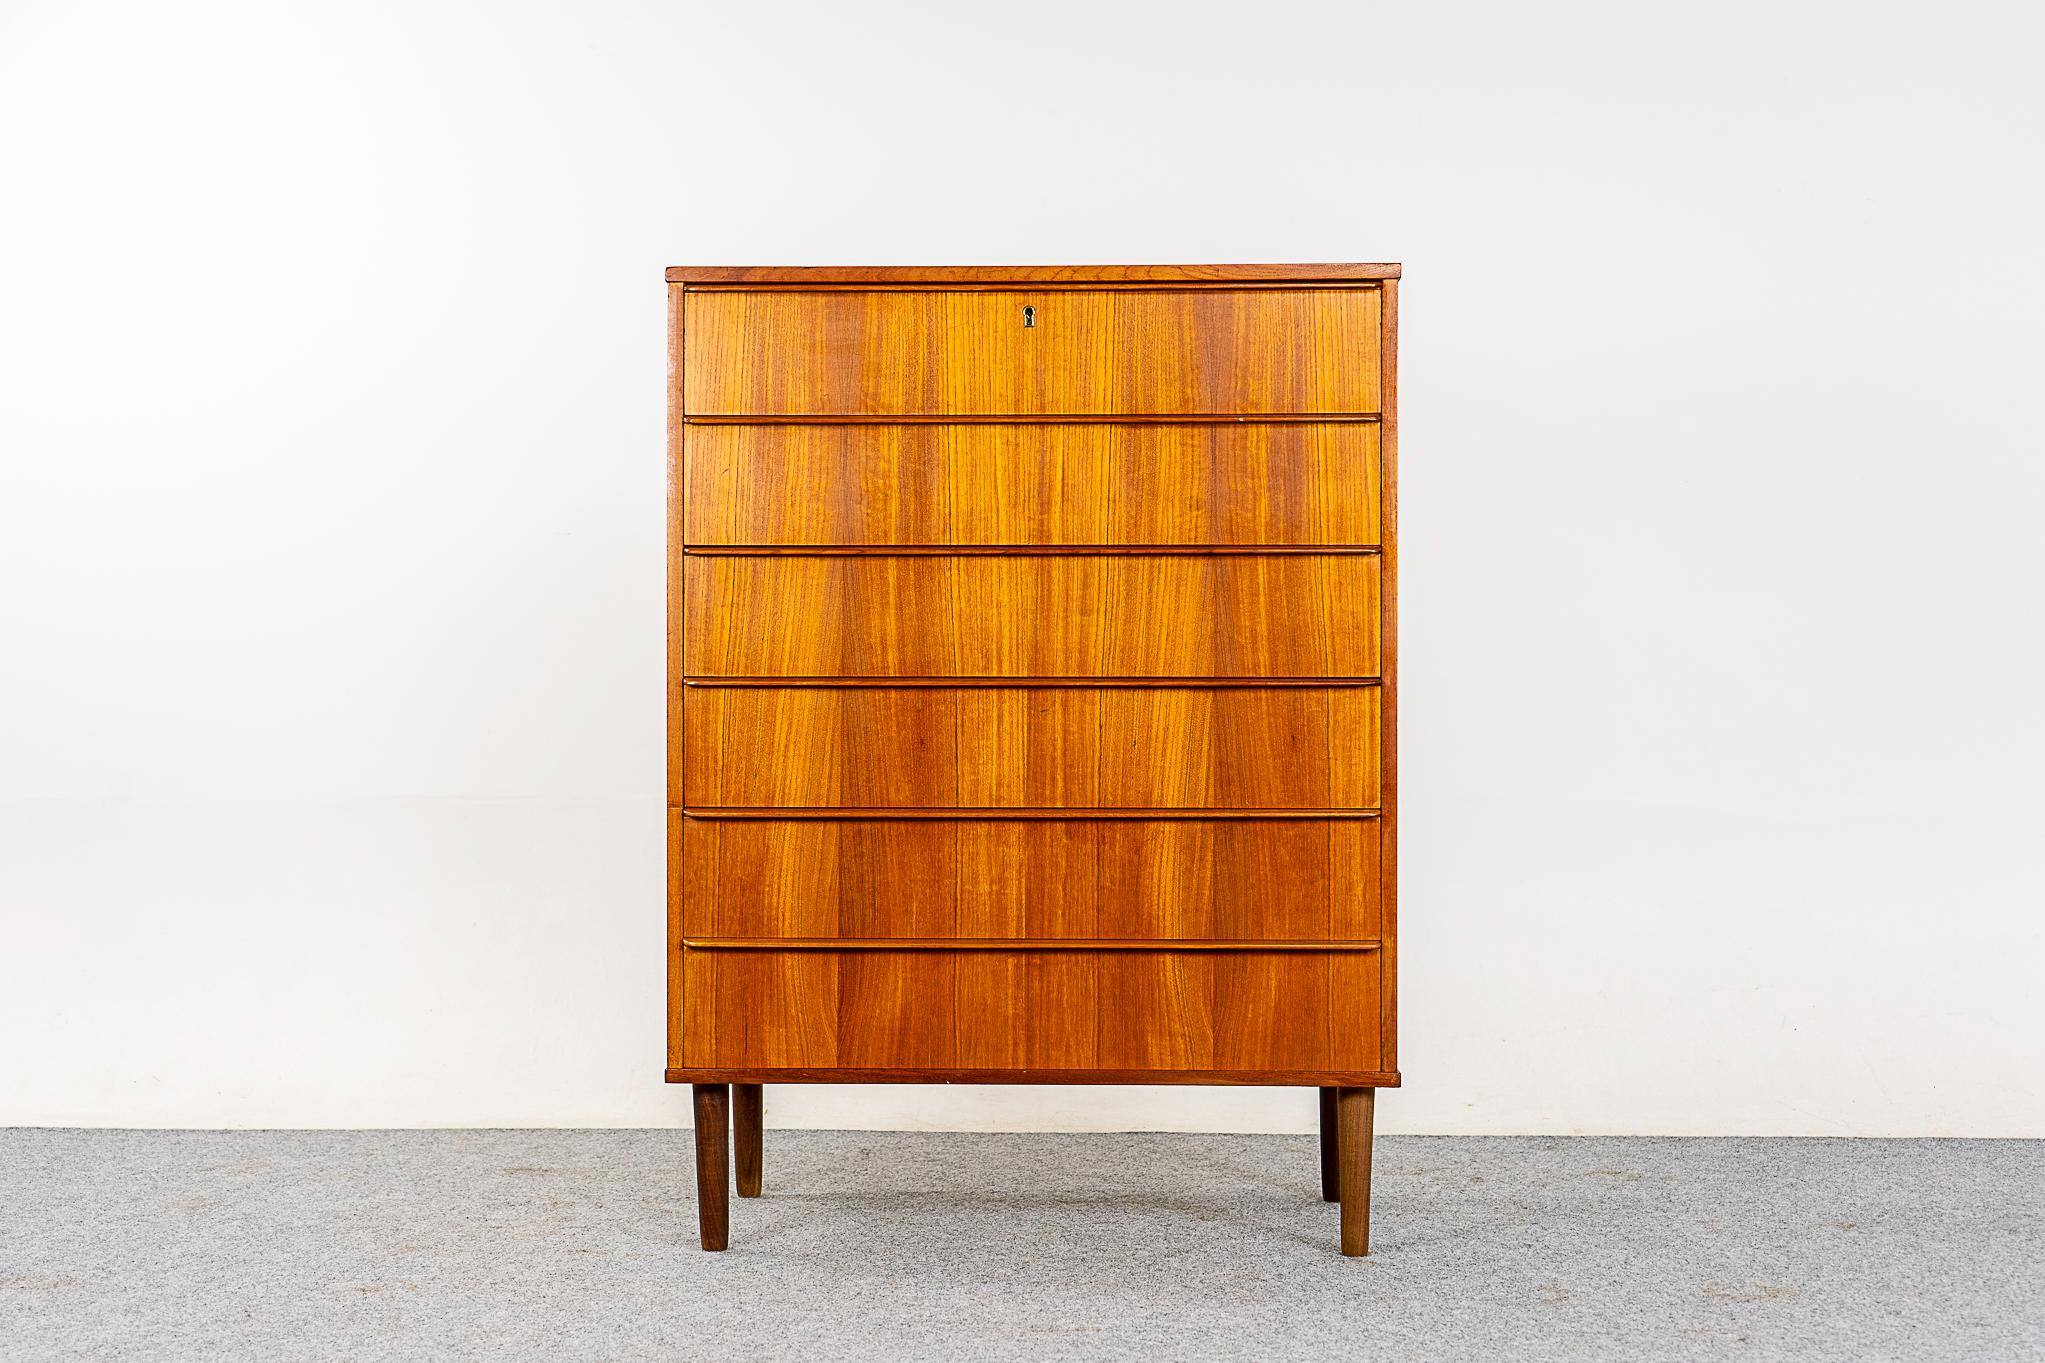 Teak Danish highboy dresser, circa 1960s. Solid wood edging with stunning book-matched veneer on all drawer faces. 6 Dovetailed drawers with integrated drawer pulls, opening and closing is a breeze. Solid wood, tapered removable legs.

Unrestored